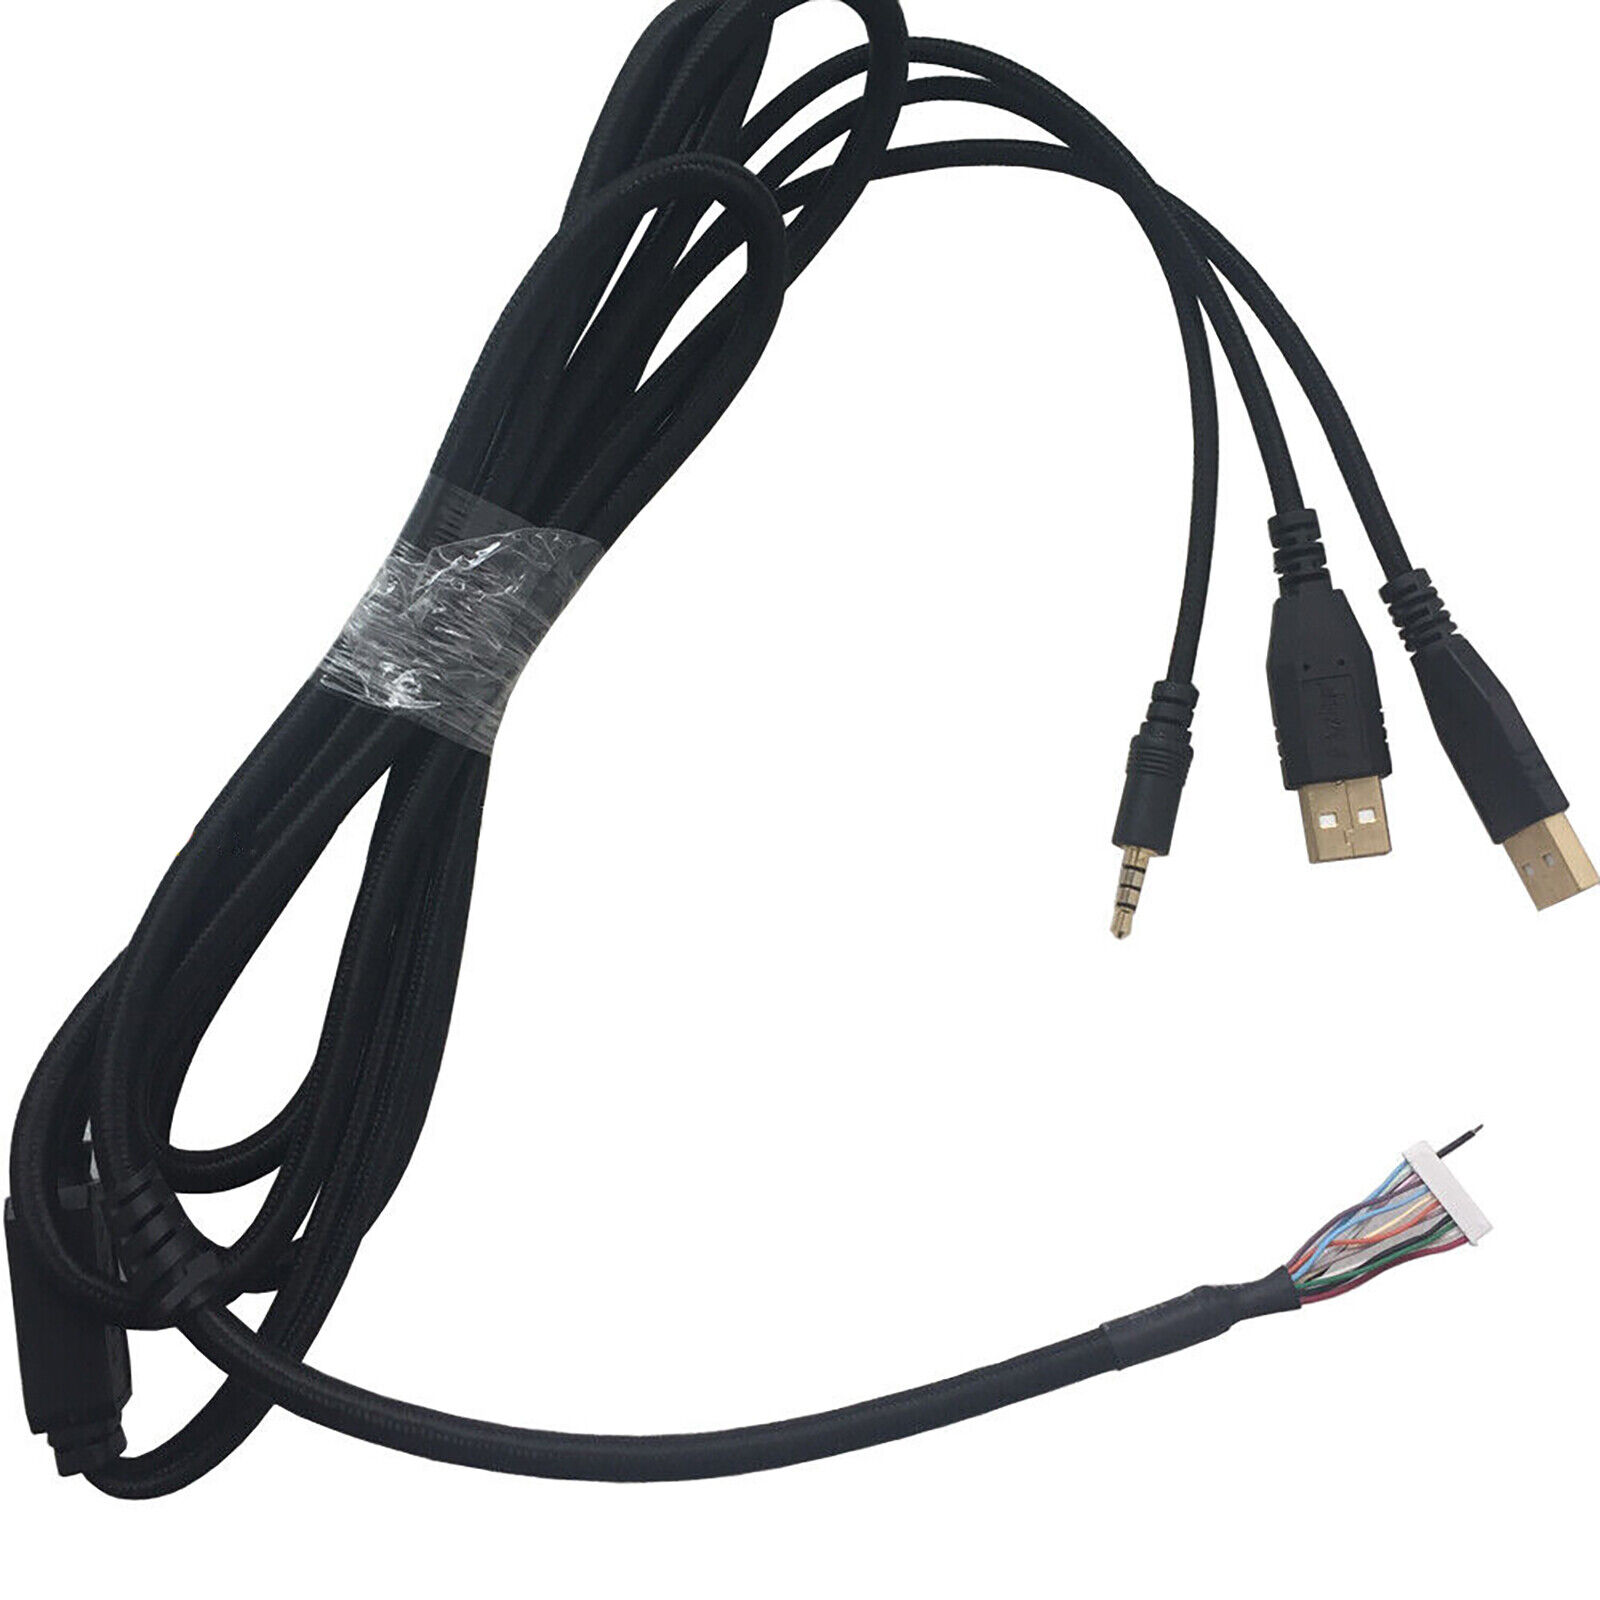 New USB Keyboard Cable Line Wire for Razer BlackWidow Ultimate Edition 2016